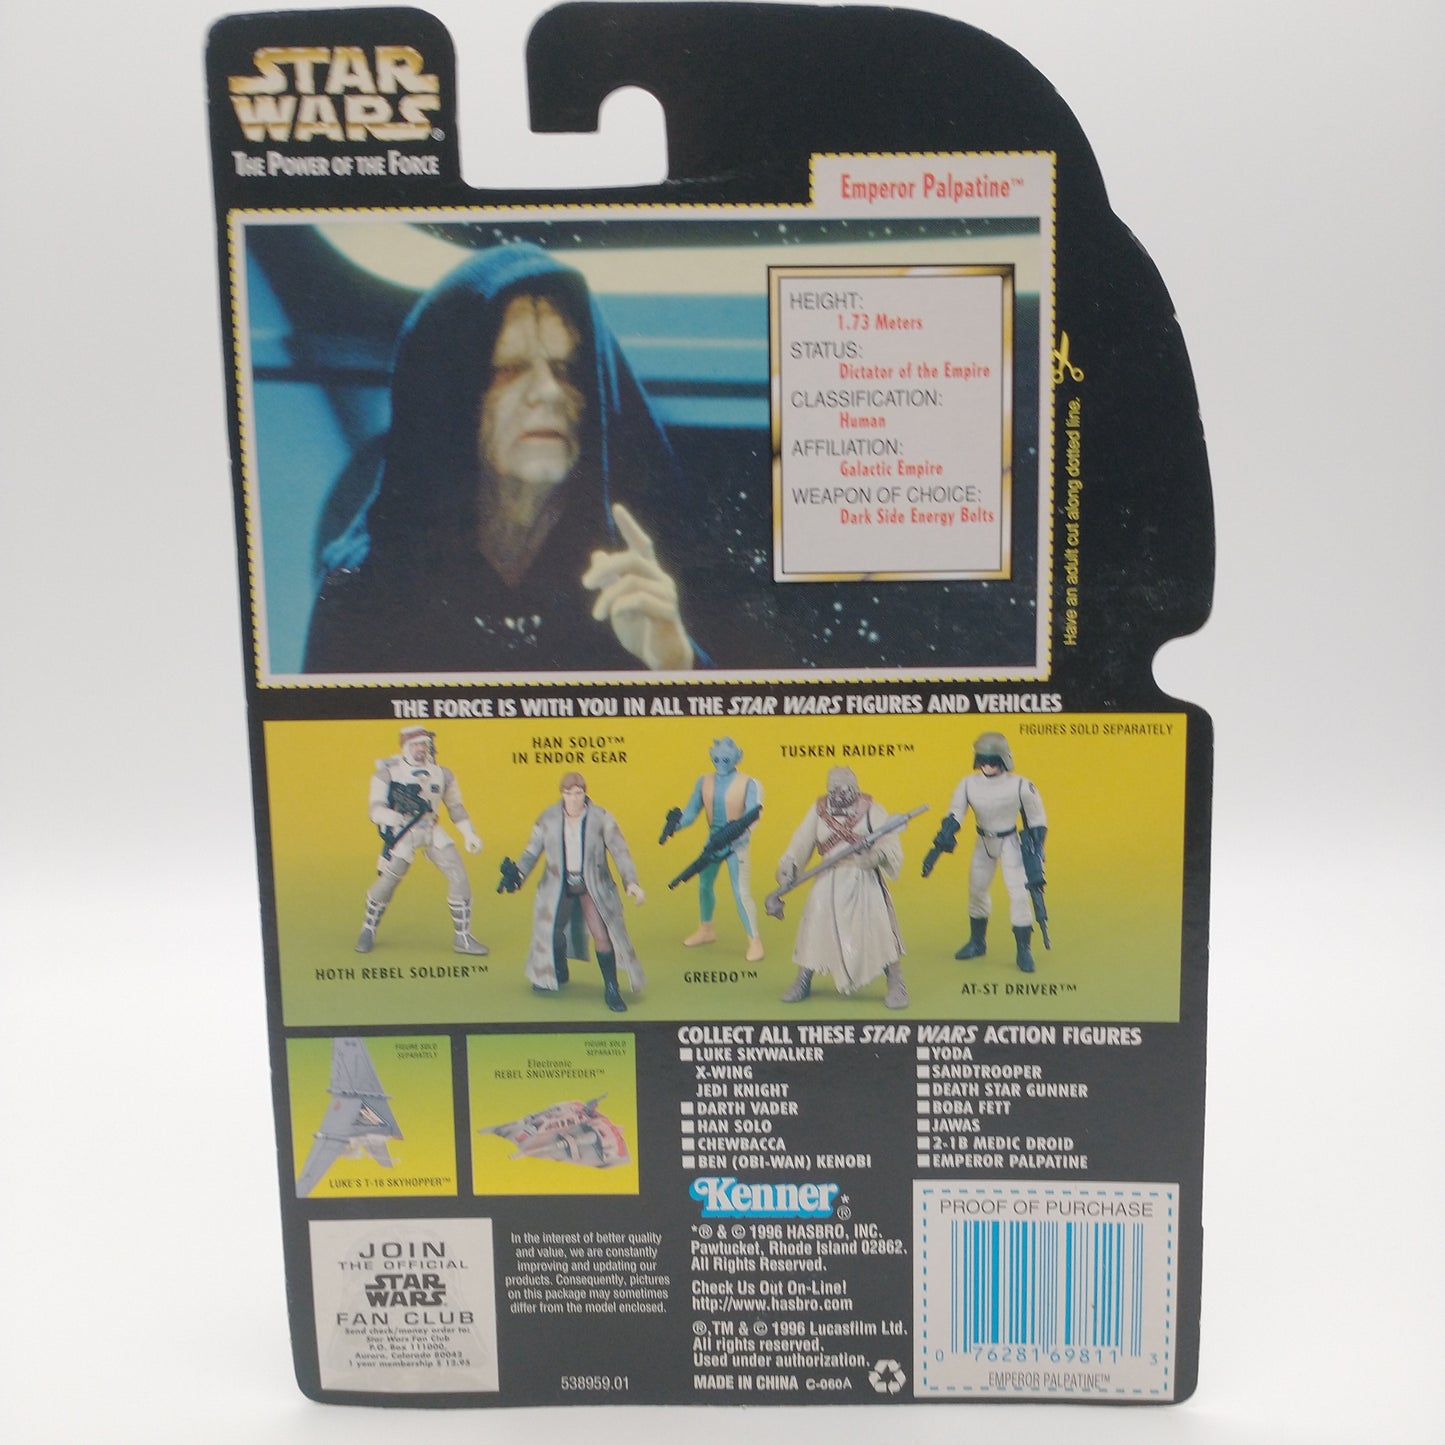 A picture of the back of the cart featuring pictures of other action figures available along with various playsets available for purchase. 